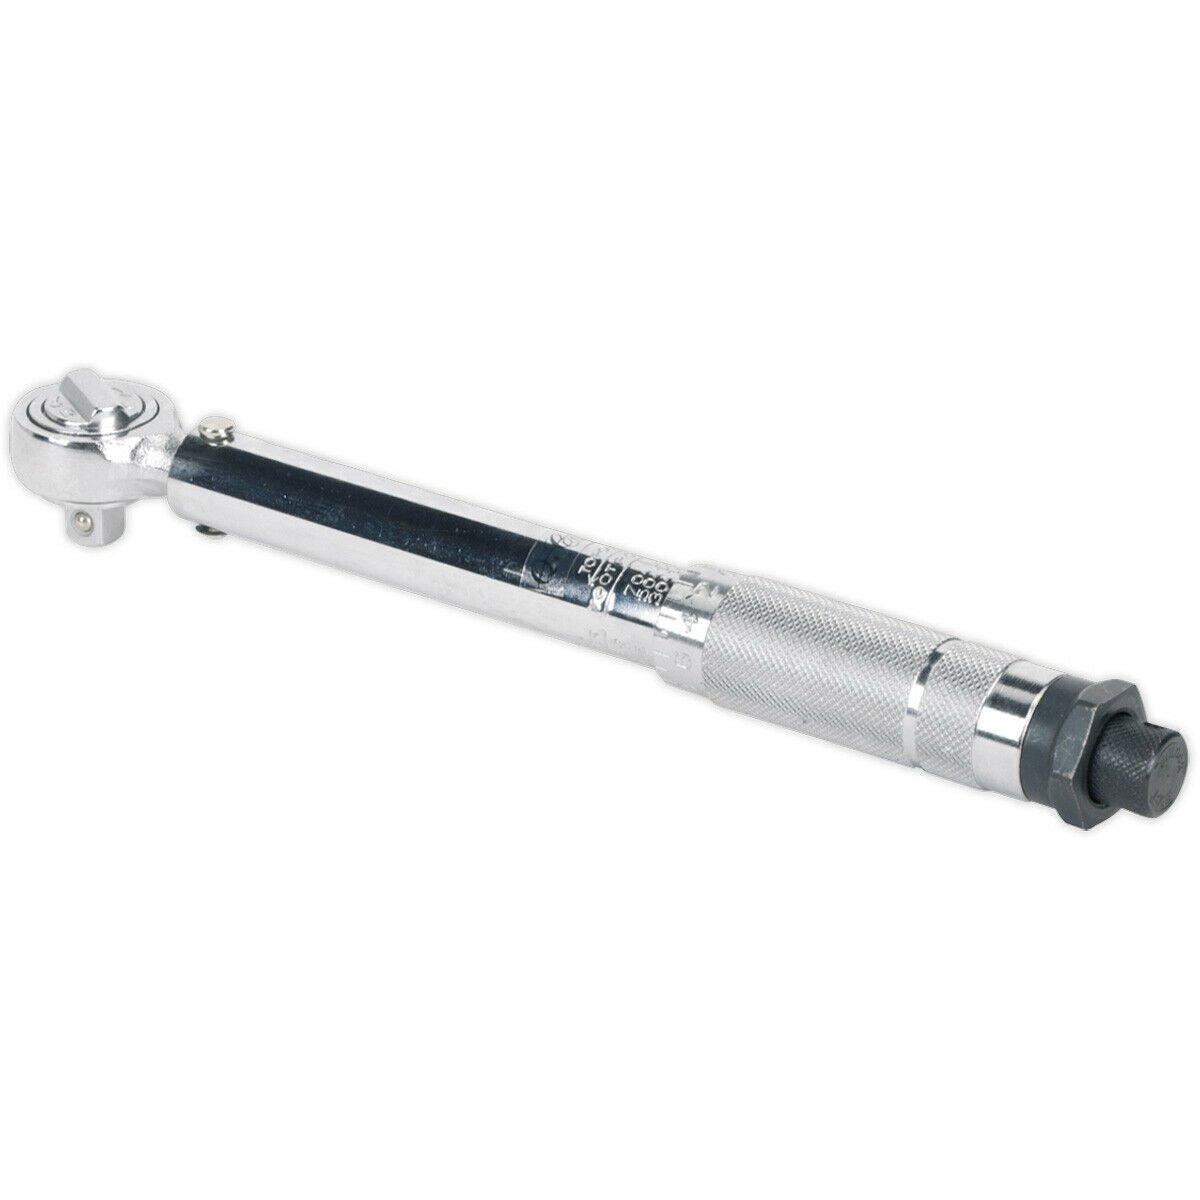 Micrometer Torque Wrench - 3/8